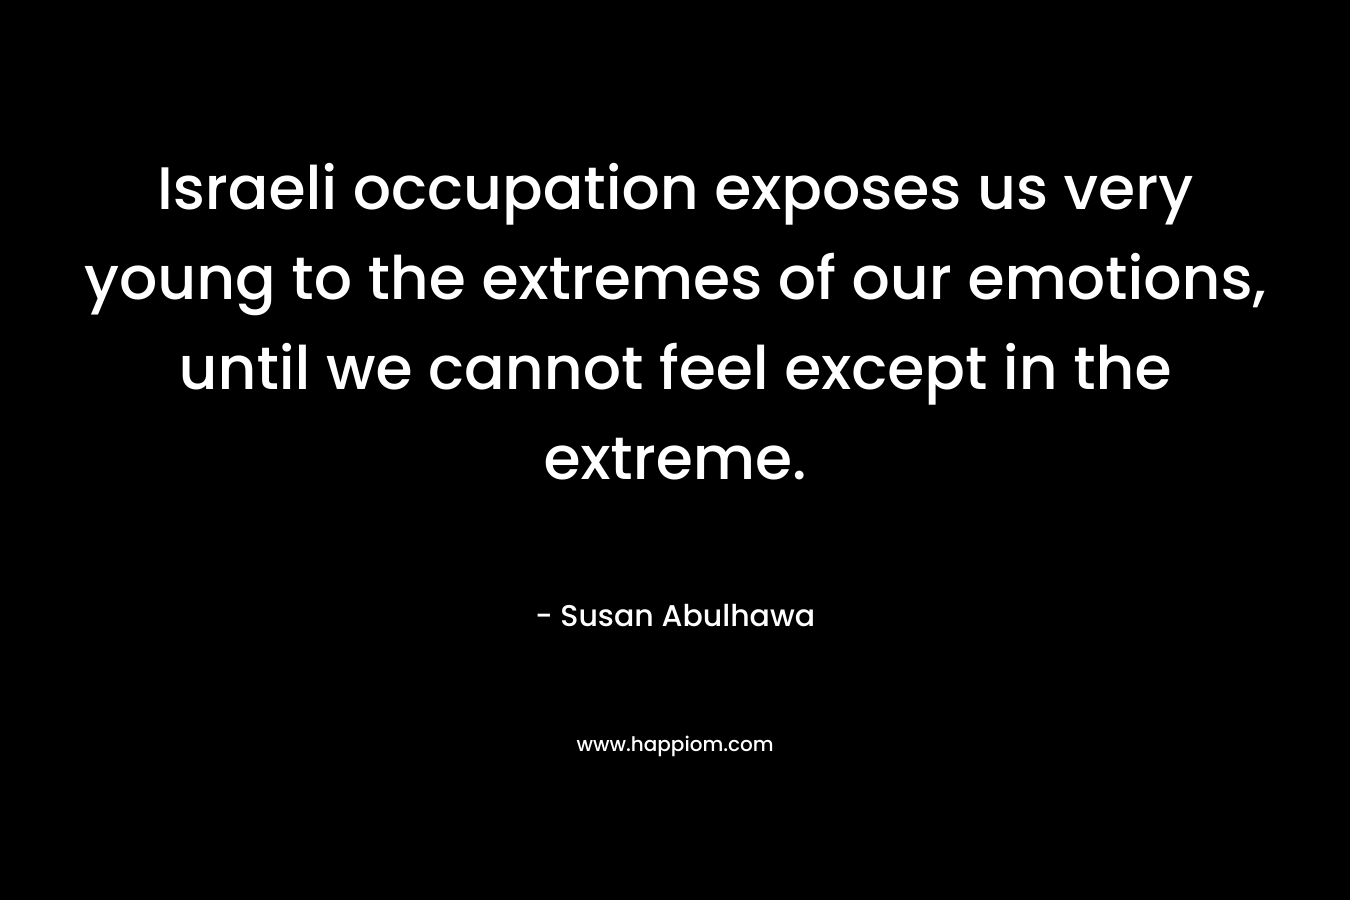 Israeli occupation exposes us very young to the extremes of our emotions, until we cannot feel except in the extreme.